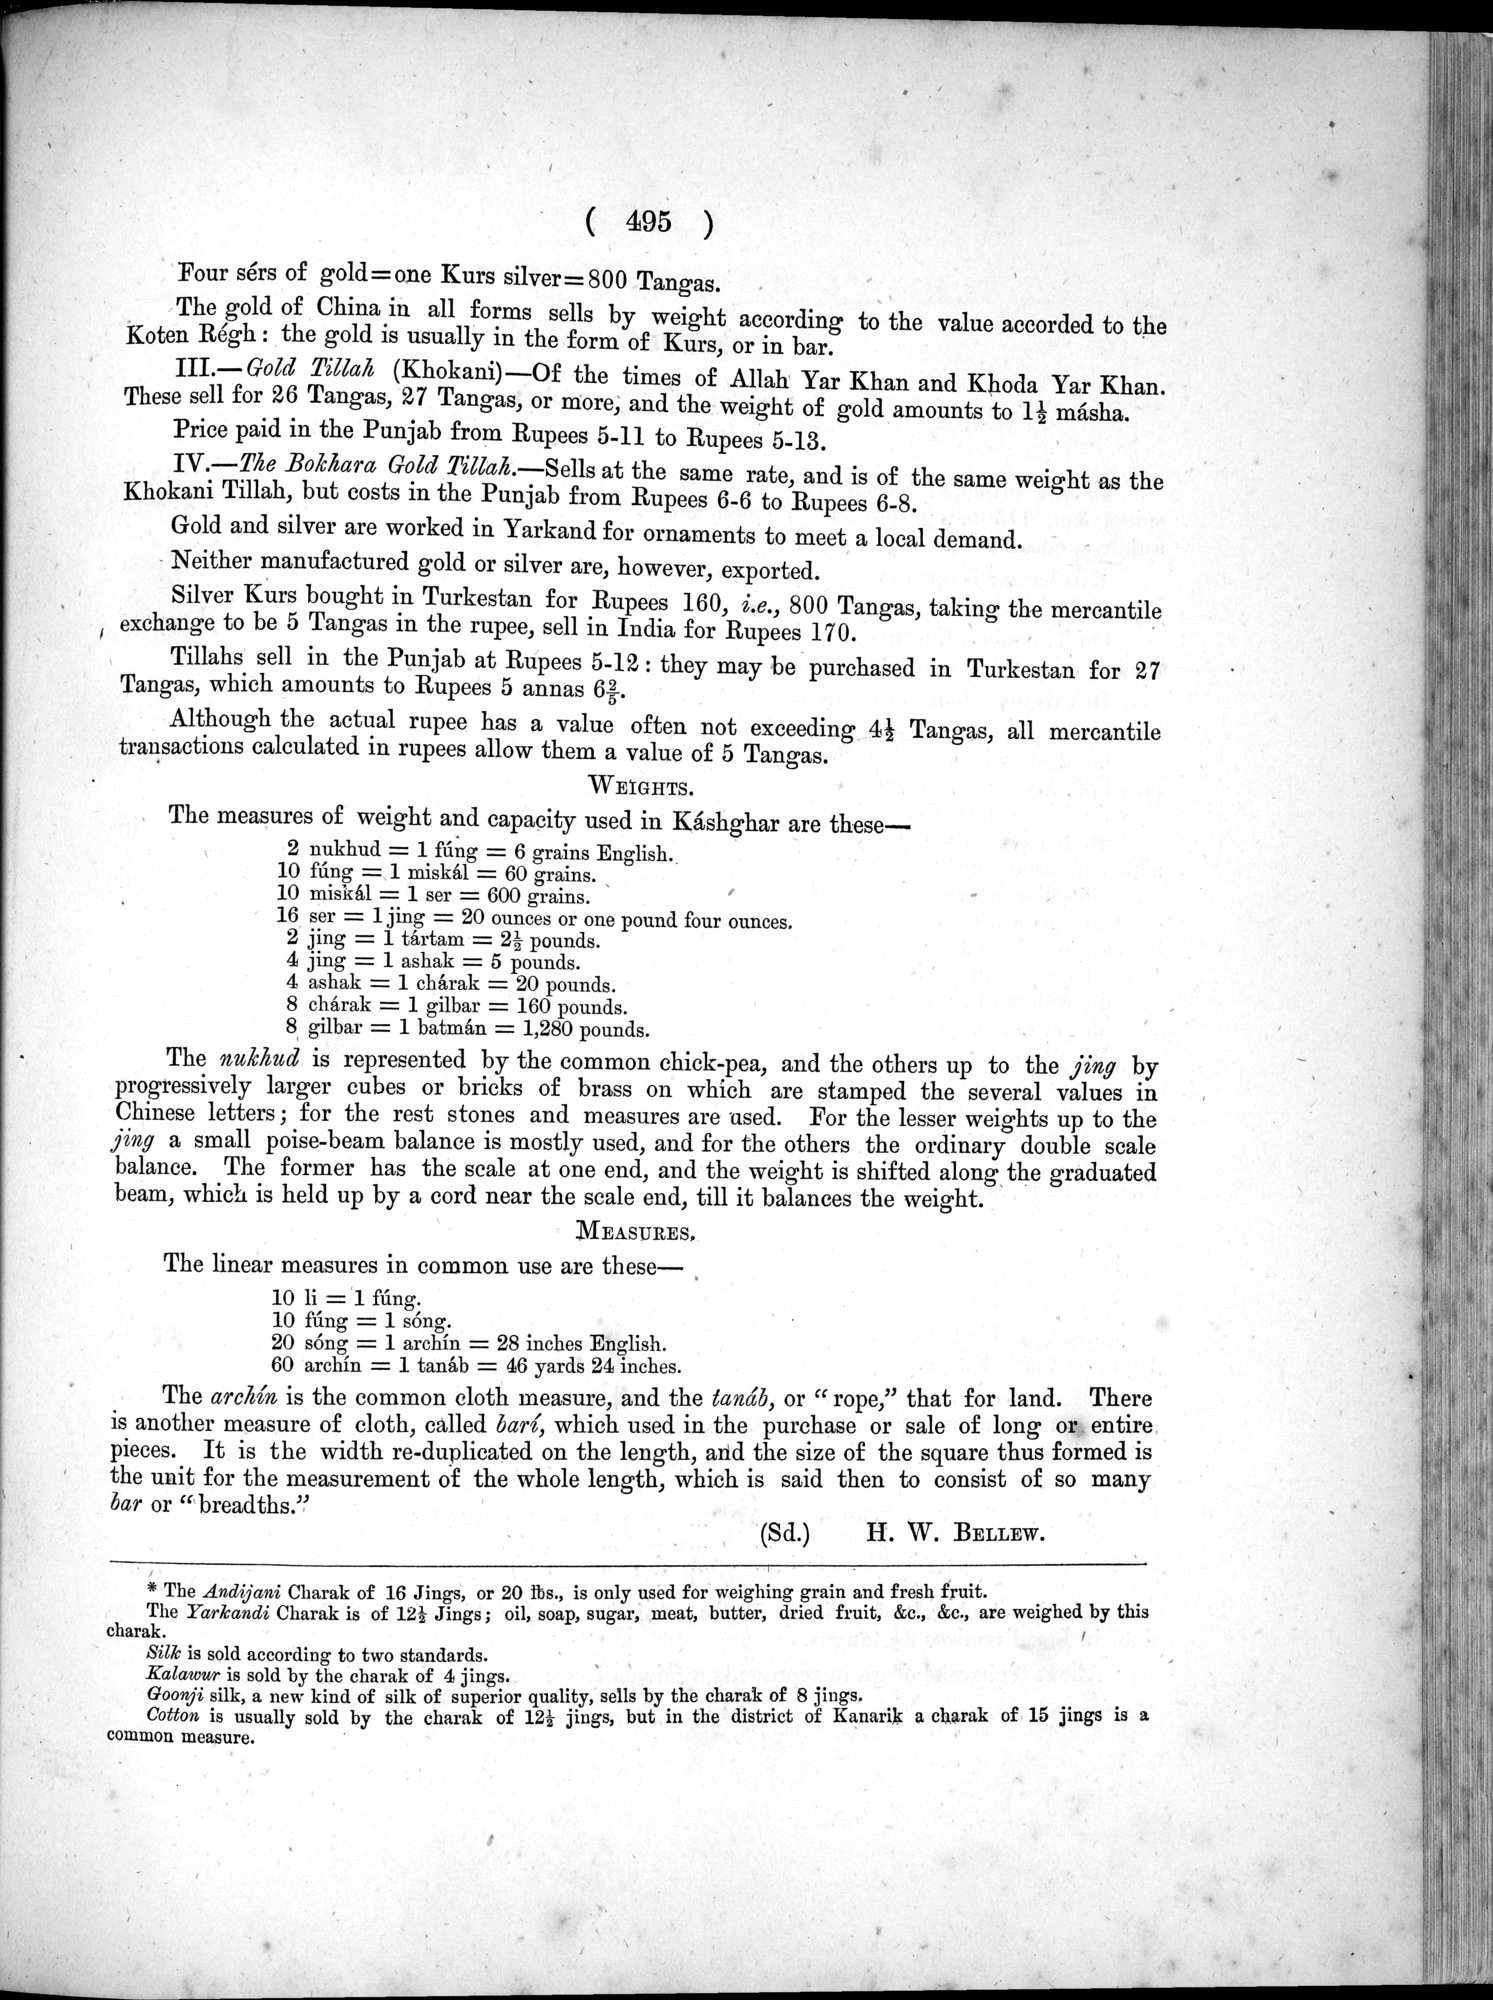 Report of a Mission to Yarkund in 1873 : vol.1 / Page 629 (Grayscale High Resolution Image)